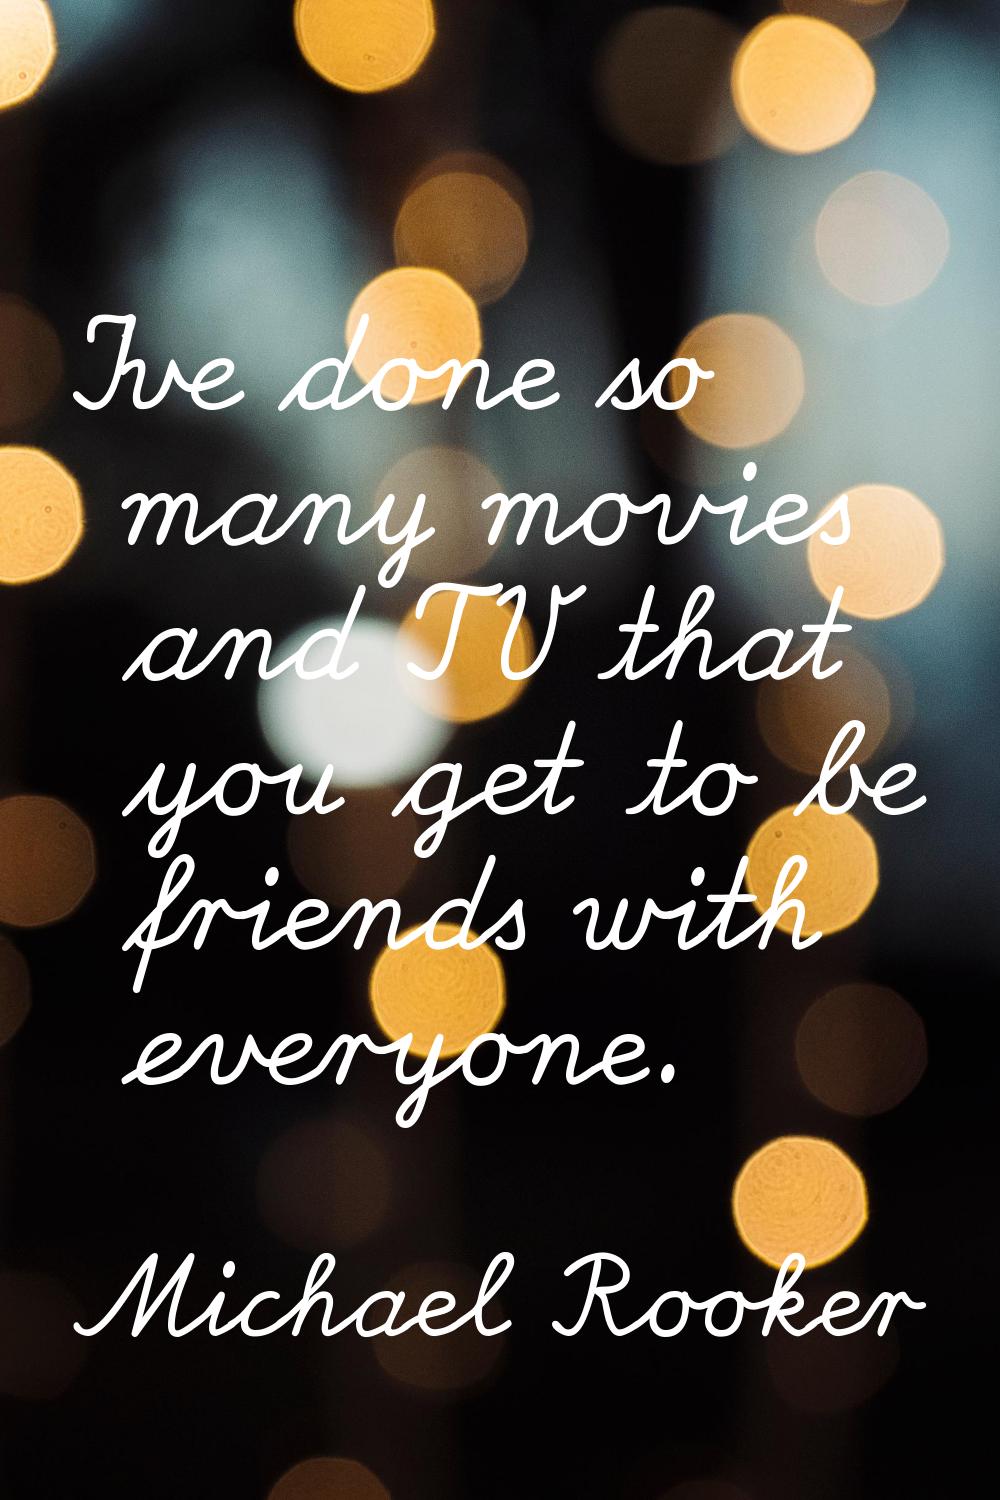 I've done so many movies and TV that you get to be friends with everyone.